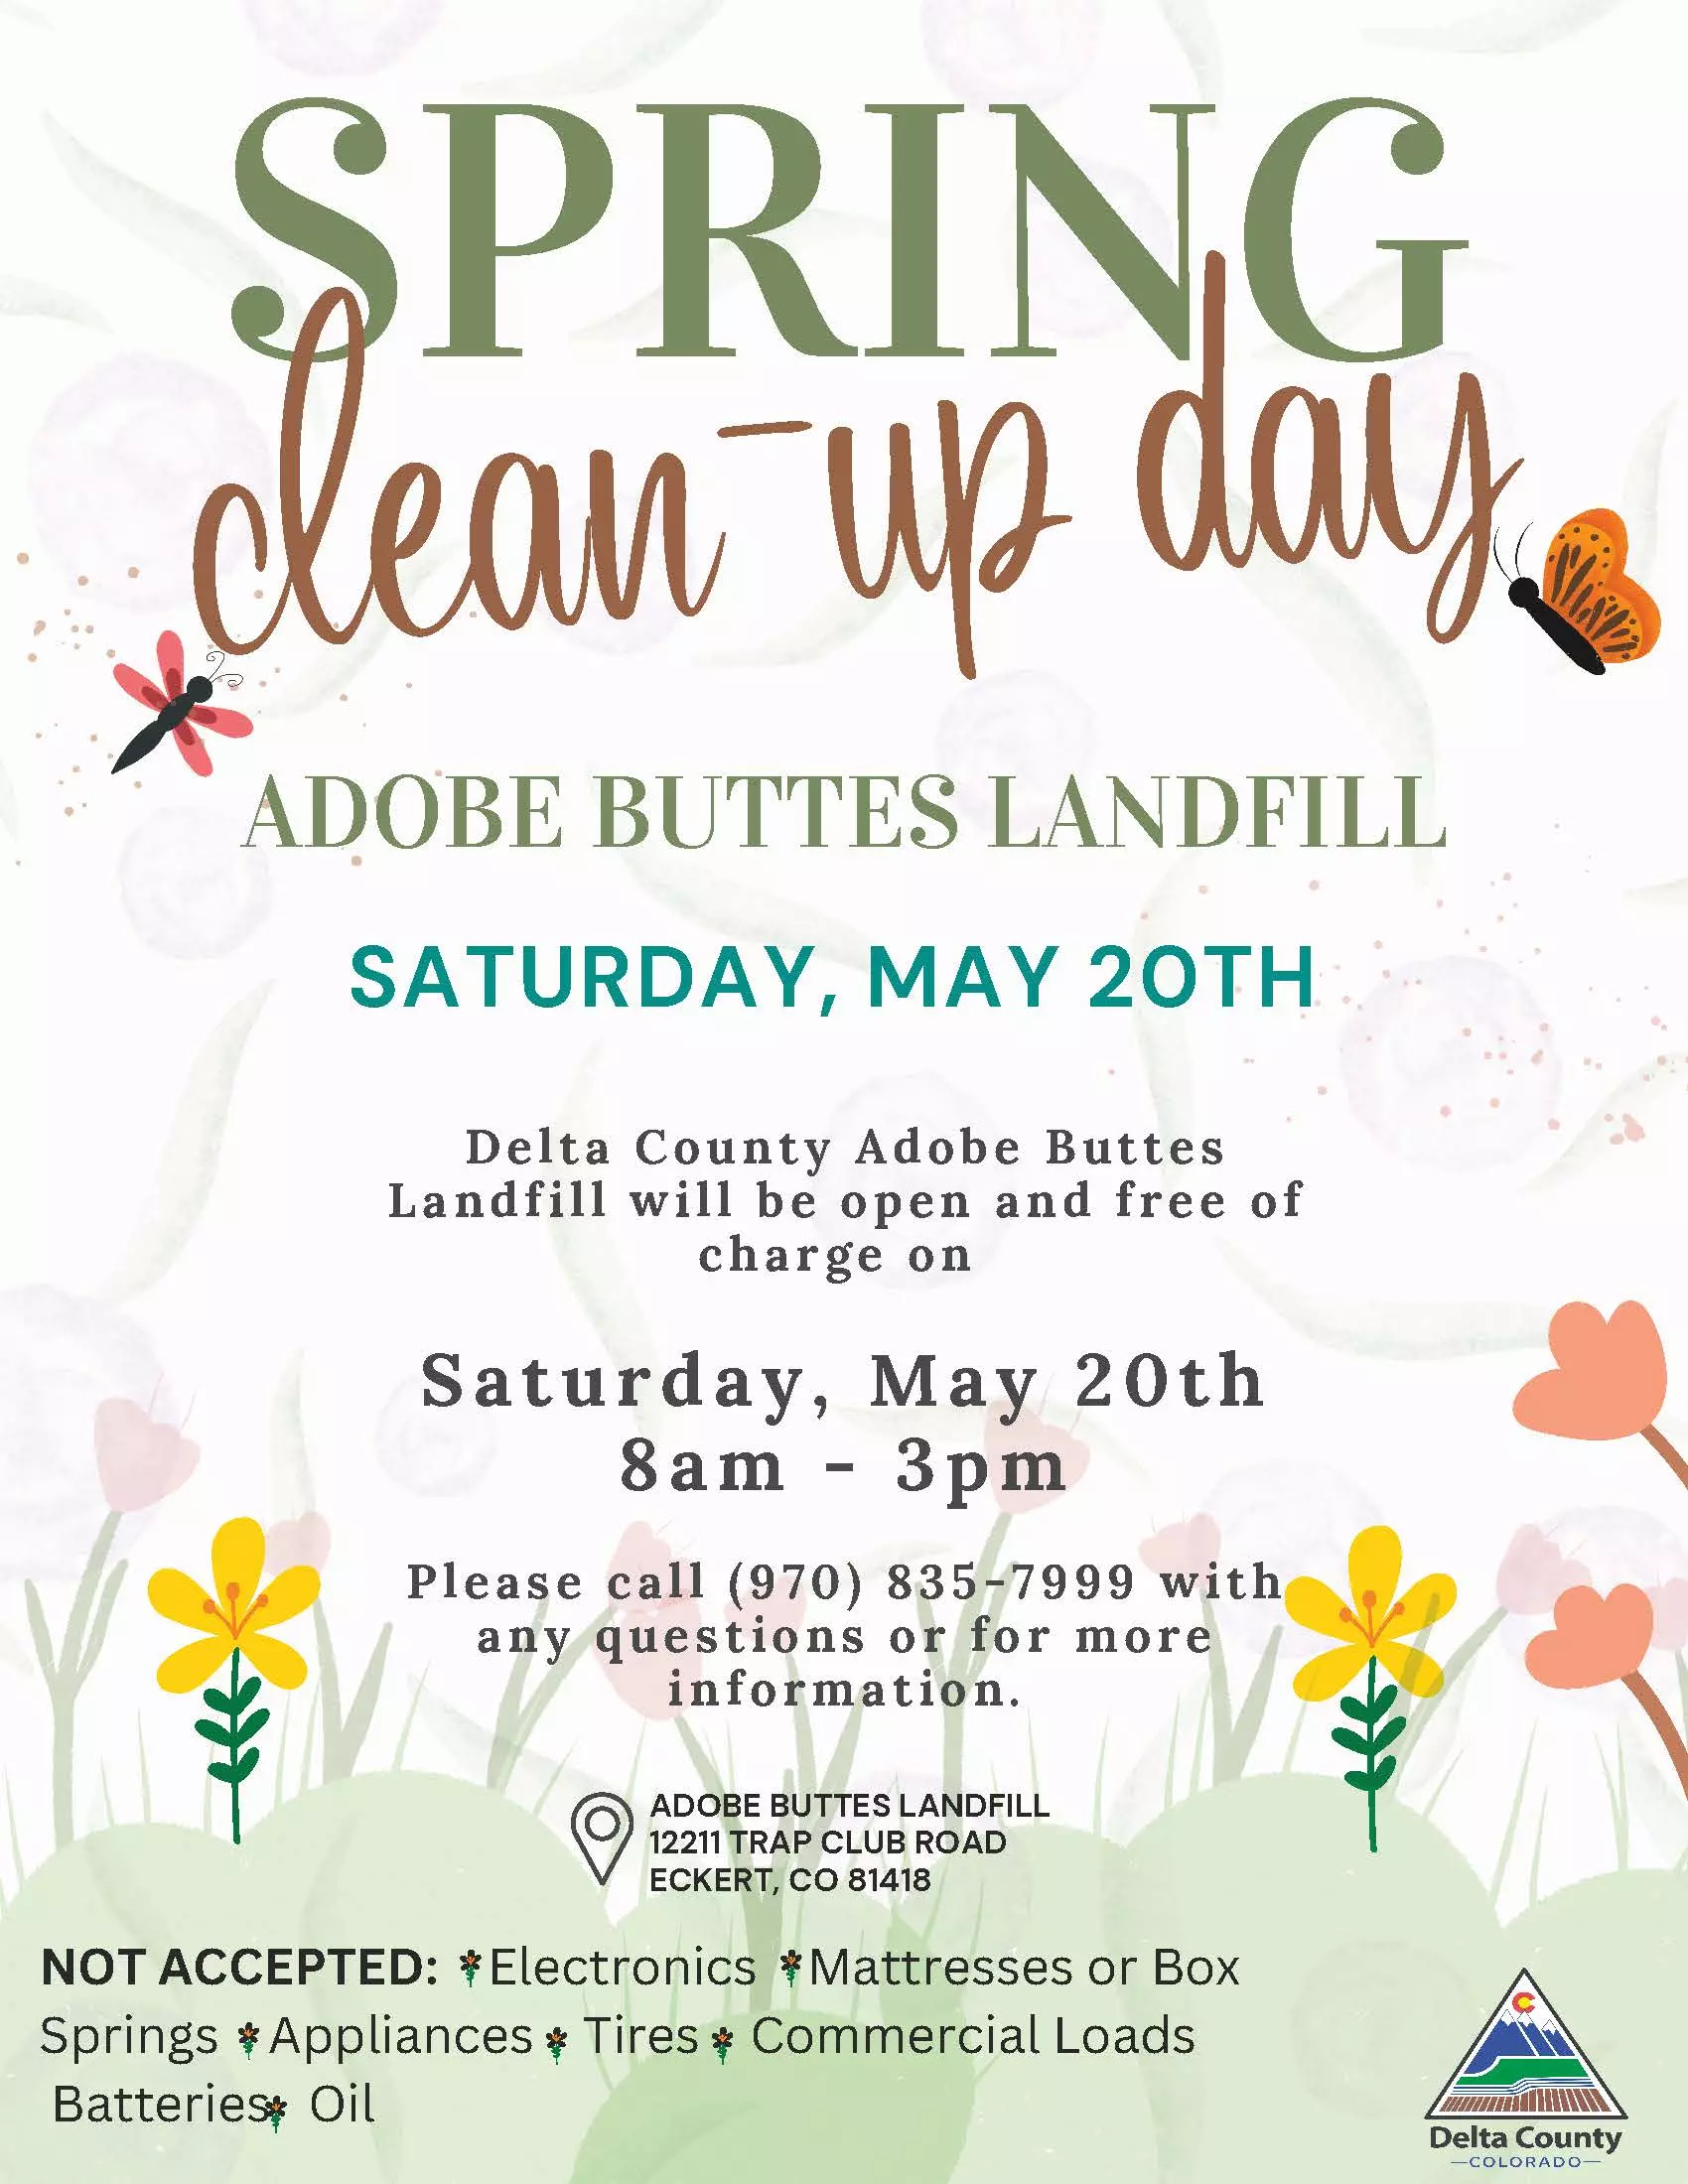 Adobe Buttes Landfill Spring Clean-Up Day!